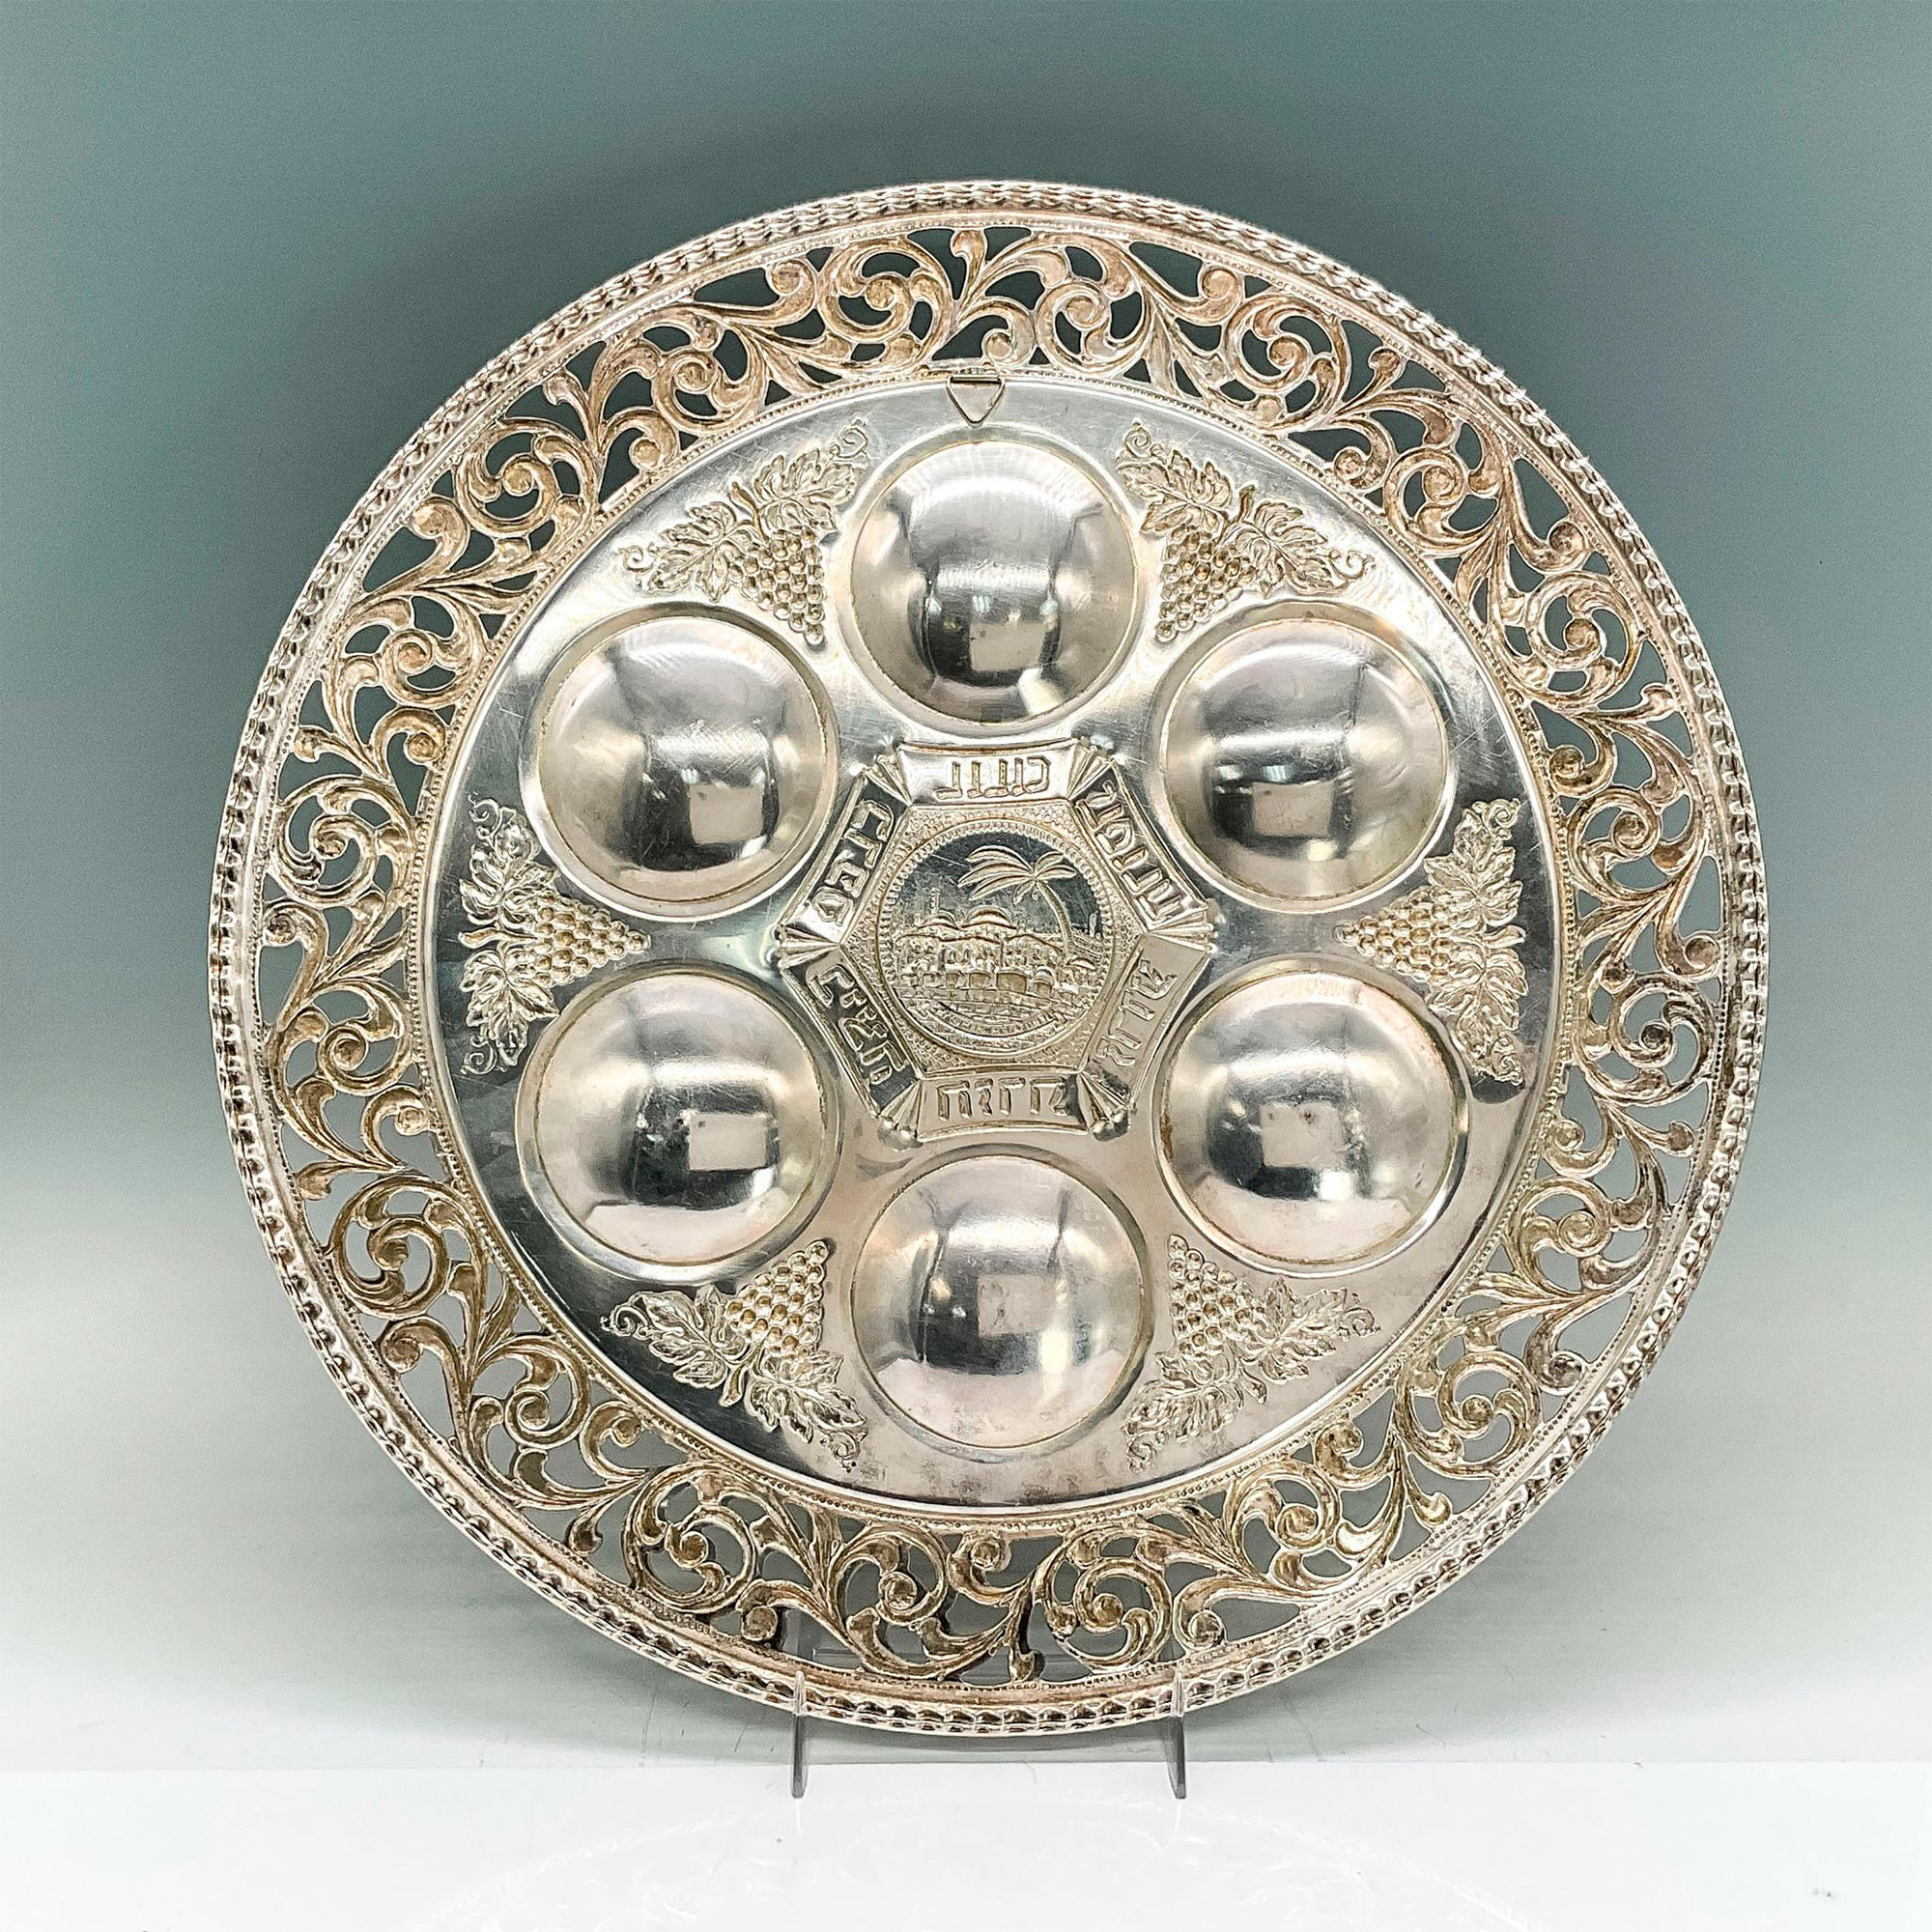 Vintage Silver Plated Passover Plate - Image 2 of 2